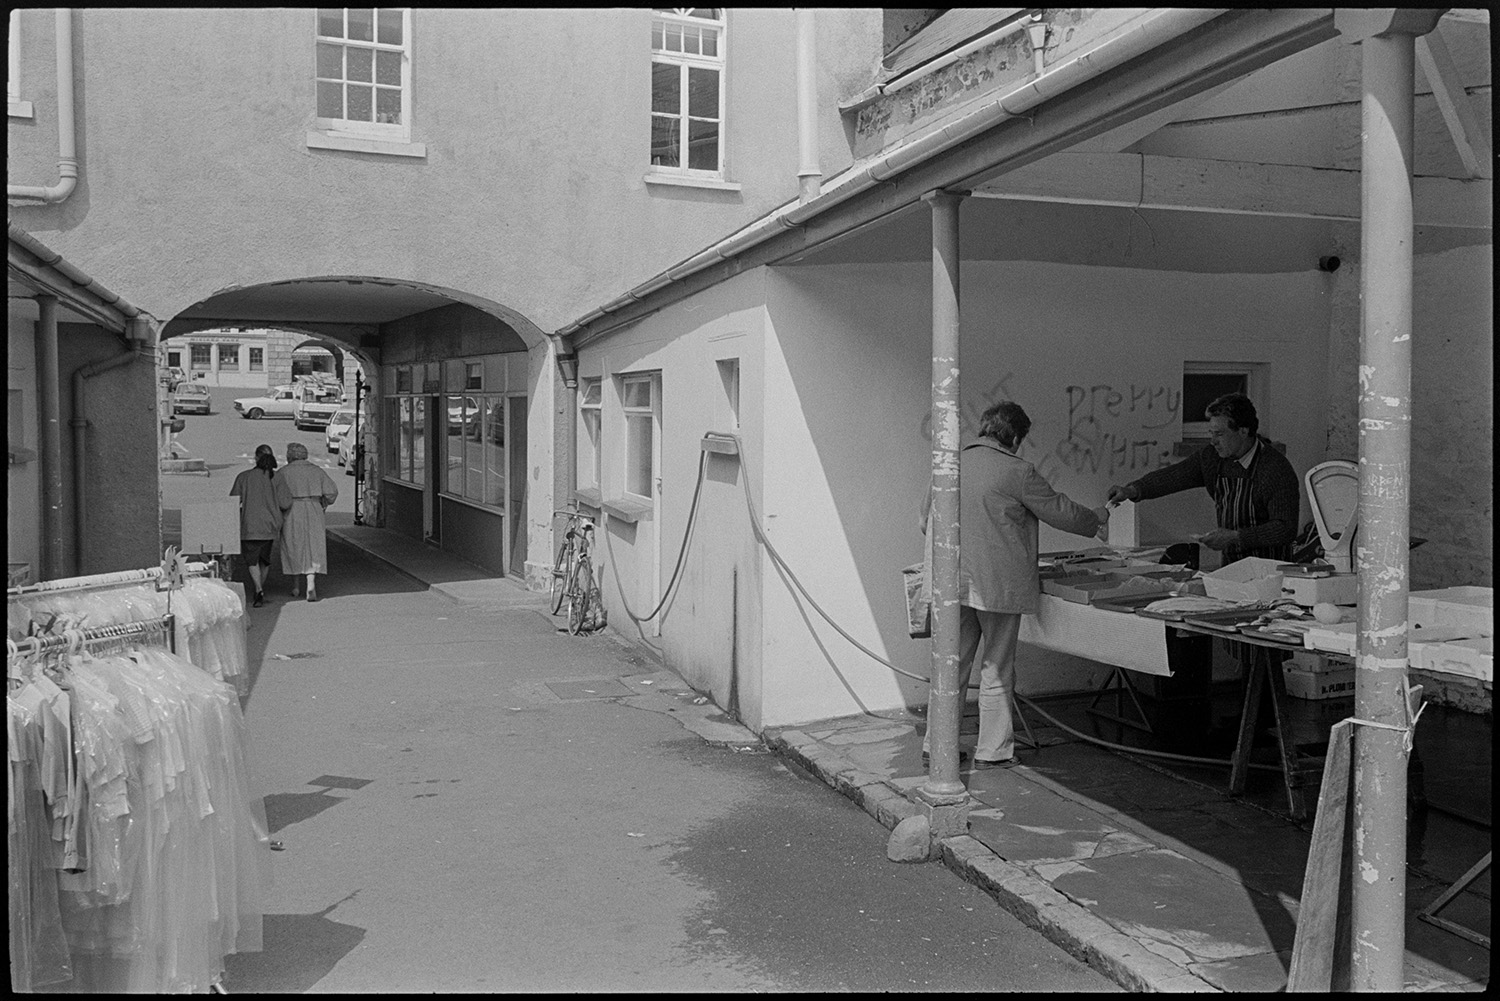 Market row in town.
[A fishmonger serving a customer at a stall in Torrington market row. A set of scales can be seen on the stall and clothes are on display at the shop opposite.  Two women are walking under the entrance arch I the background.]